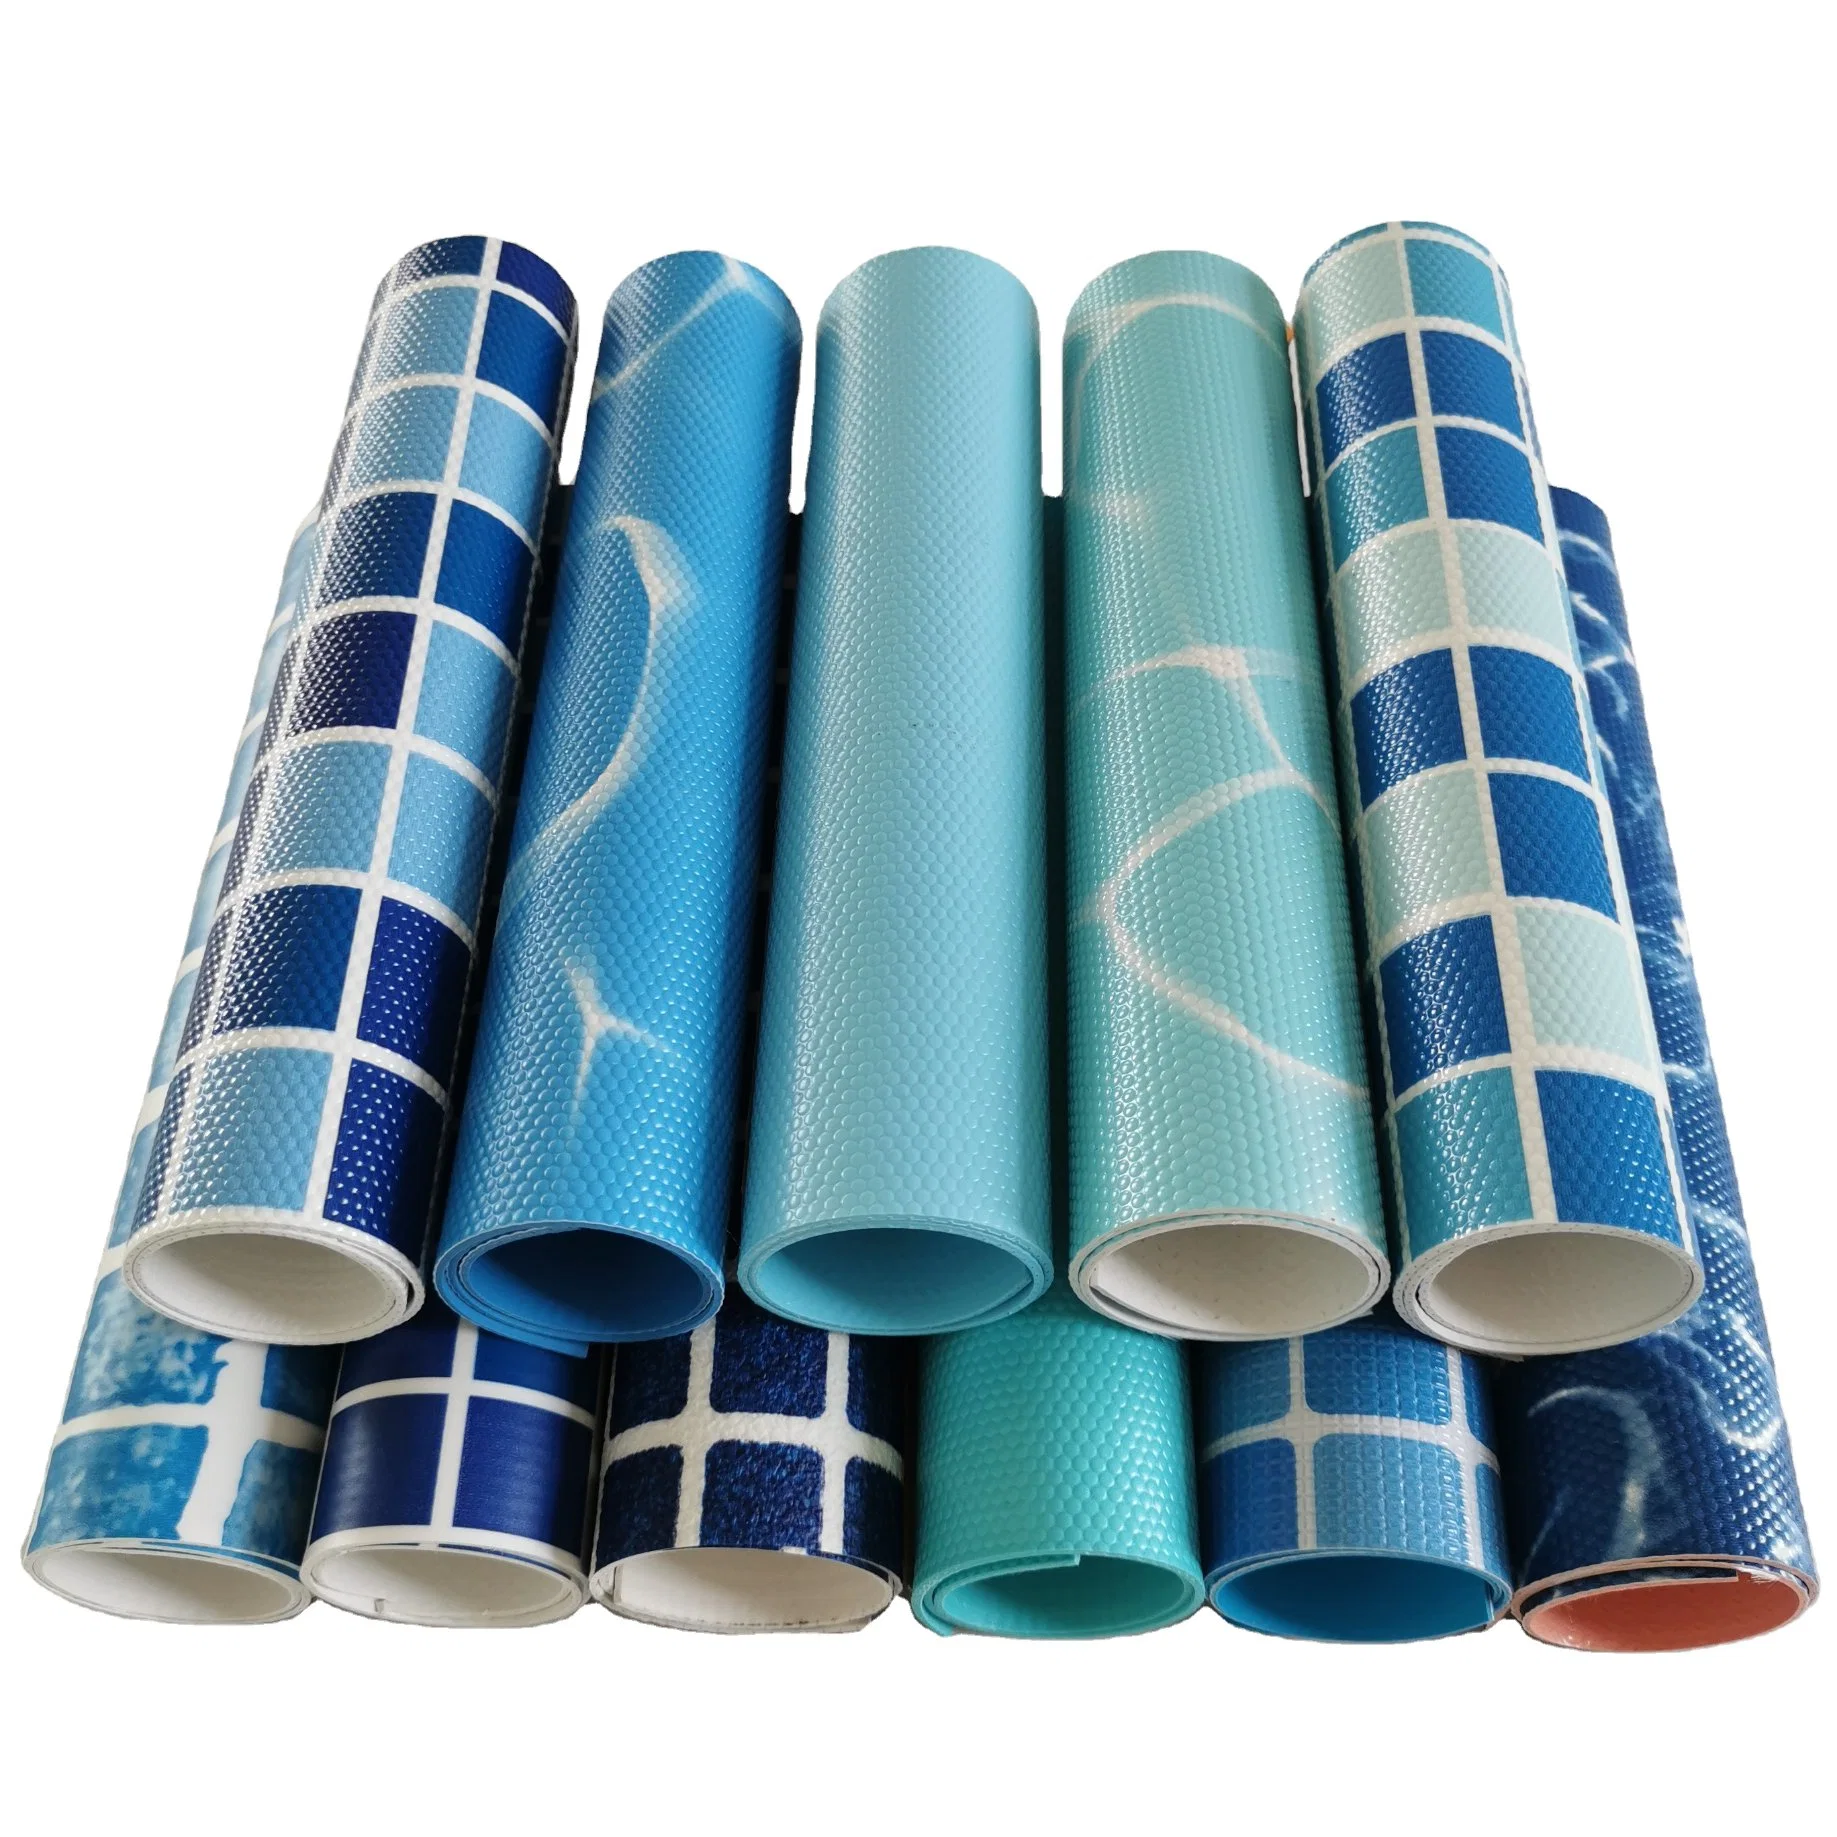 PVC Swimming Pool Liners for Squared Swimming Pool